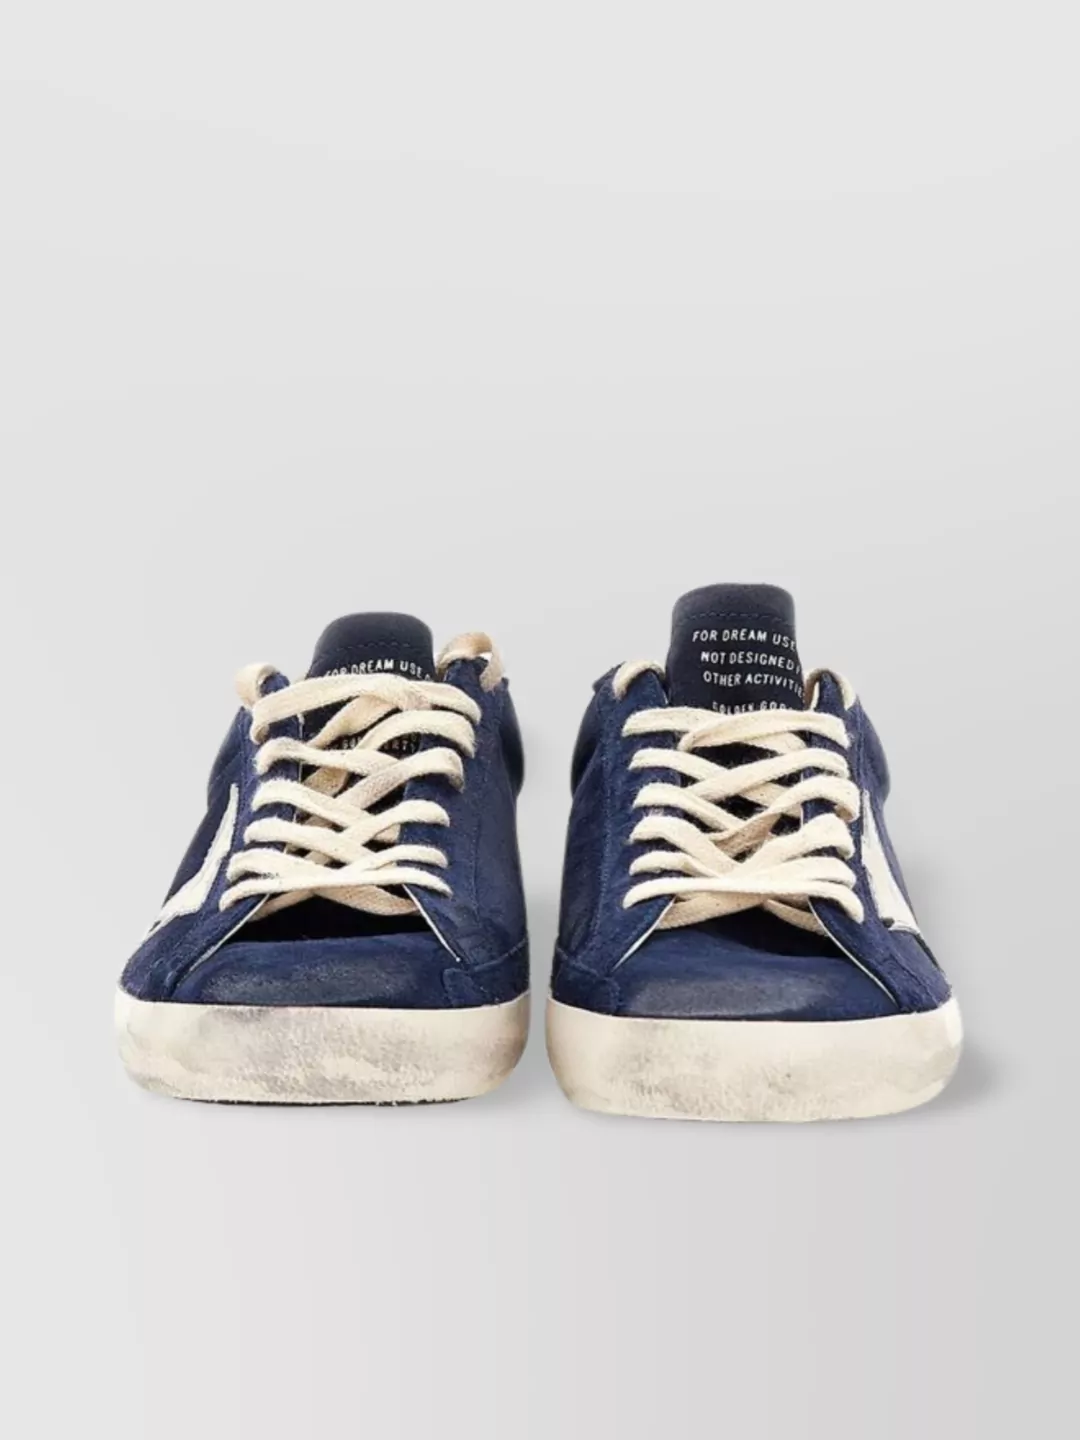 GOLDEN GOOSE STAR SIDE DISTRESSED SUEDE SNEAKERS